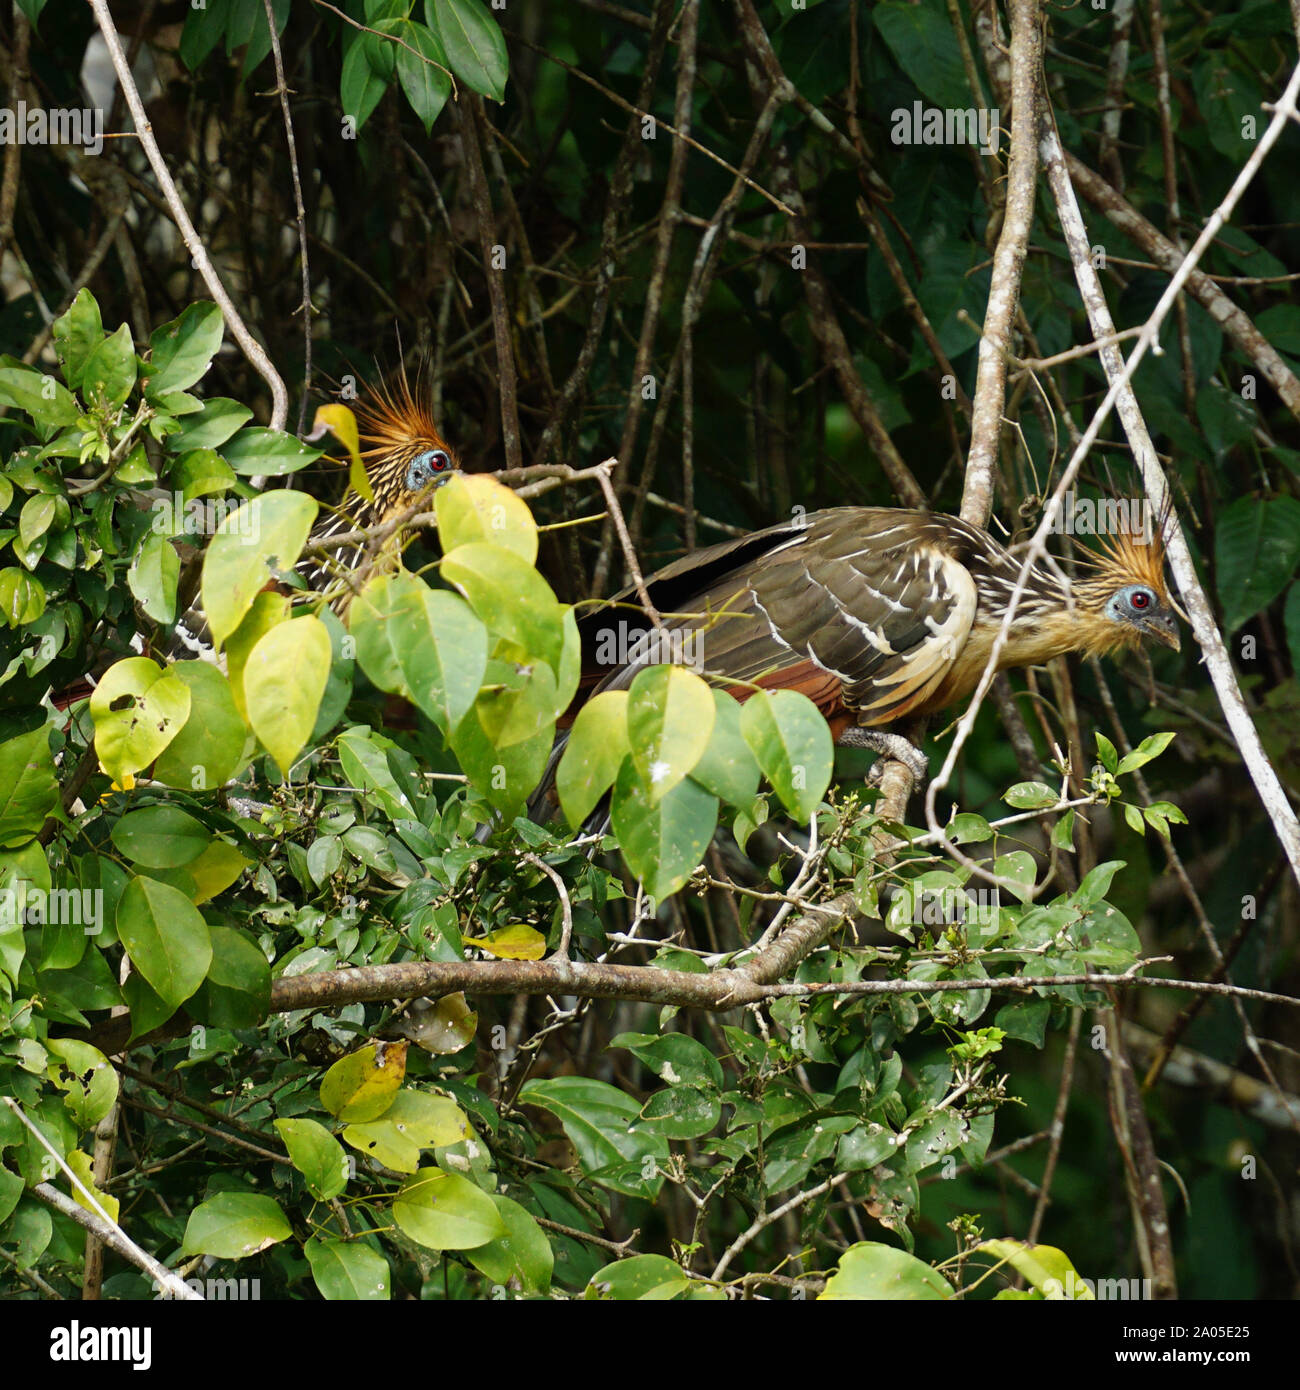 The hoatzin (Opisthocomus hoazin), also known as the reptile bird, skunk bird, stinkbird, or Canje pheasant, is a species of tropical bird found in swamps, riparian forests, and mangroves of the Amazon and the Orinoco basins in South America. It is notable for having chicks that have claws on two of their wing digits. Stock Photo